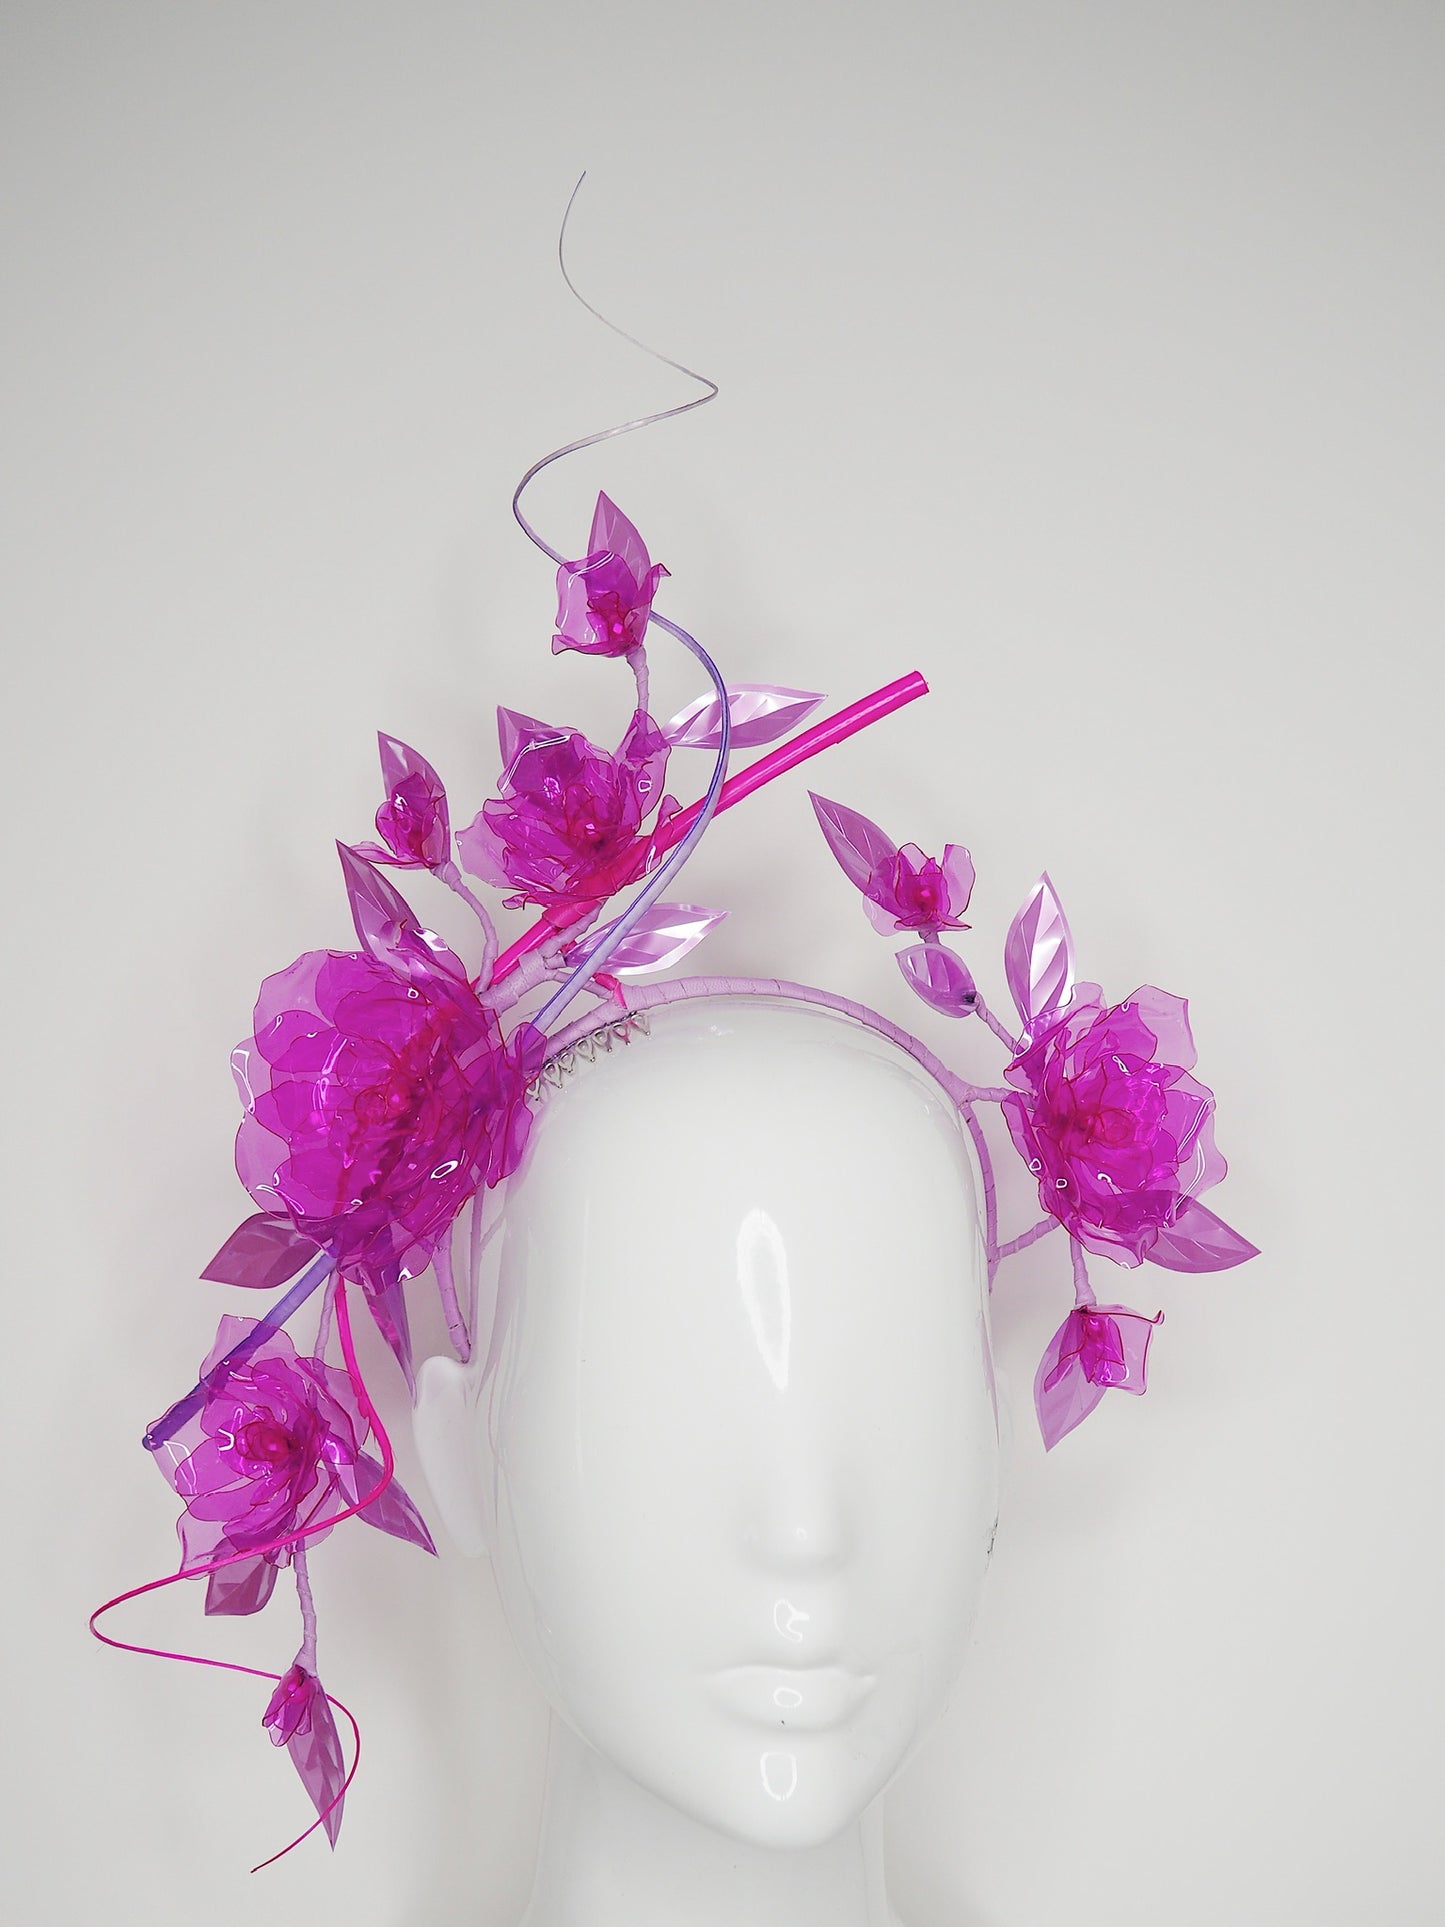 Dream Garden - Translucent pink roses and blossoms with lavender purple leaves and quills